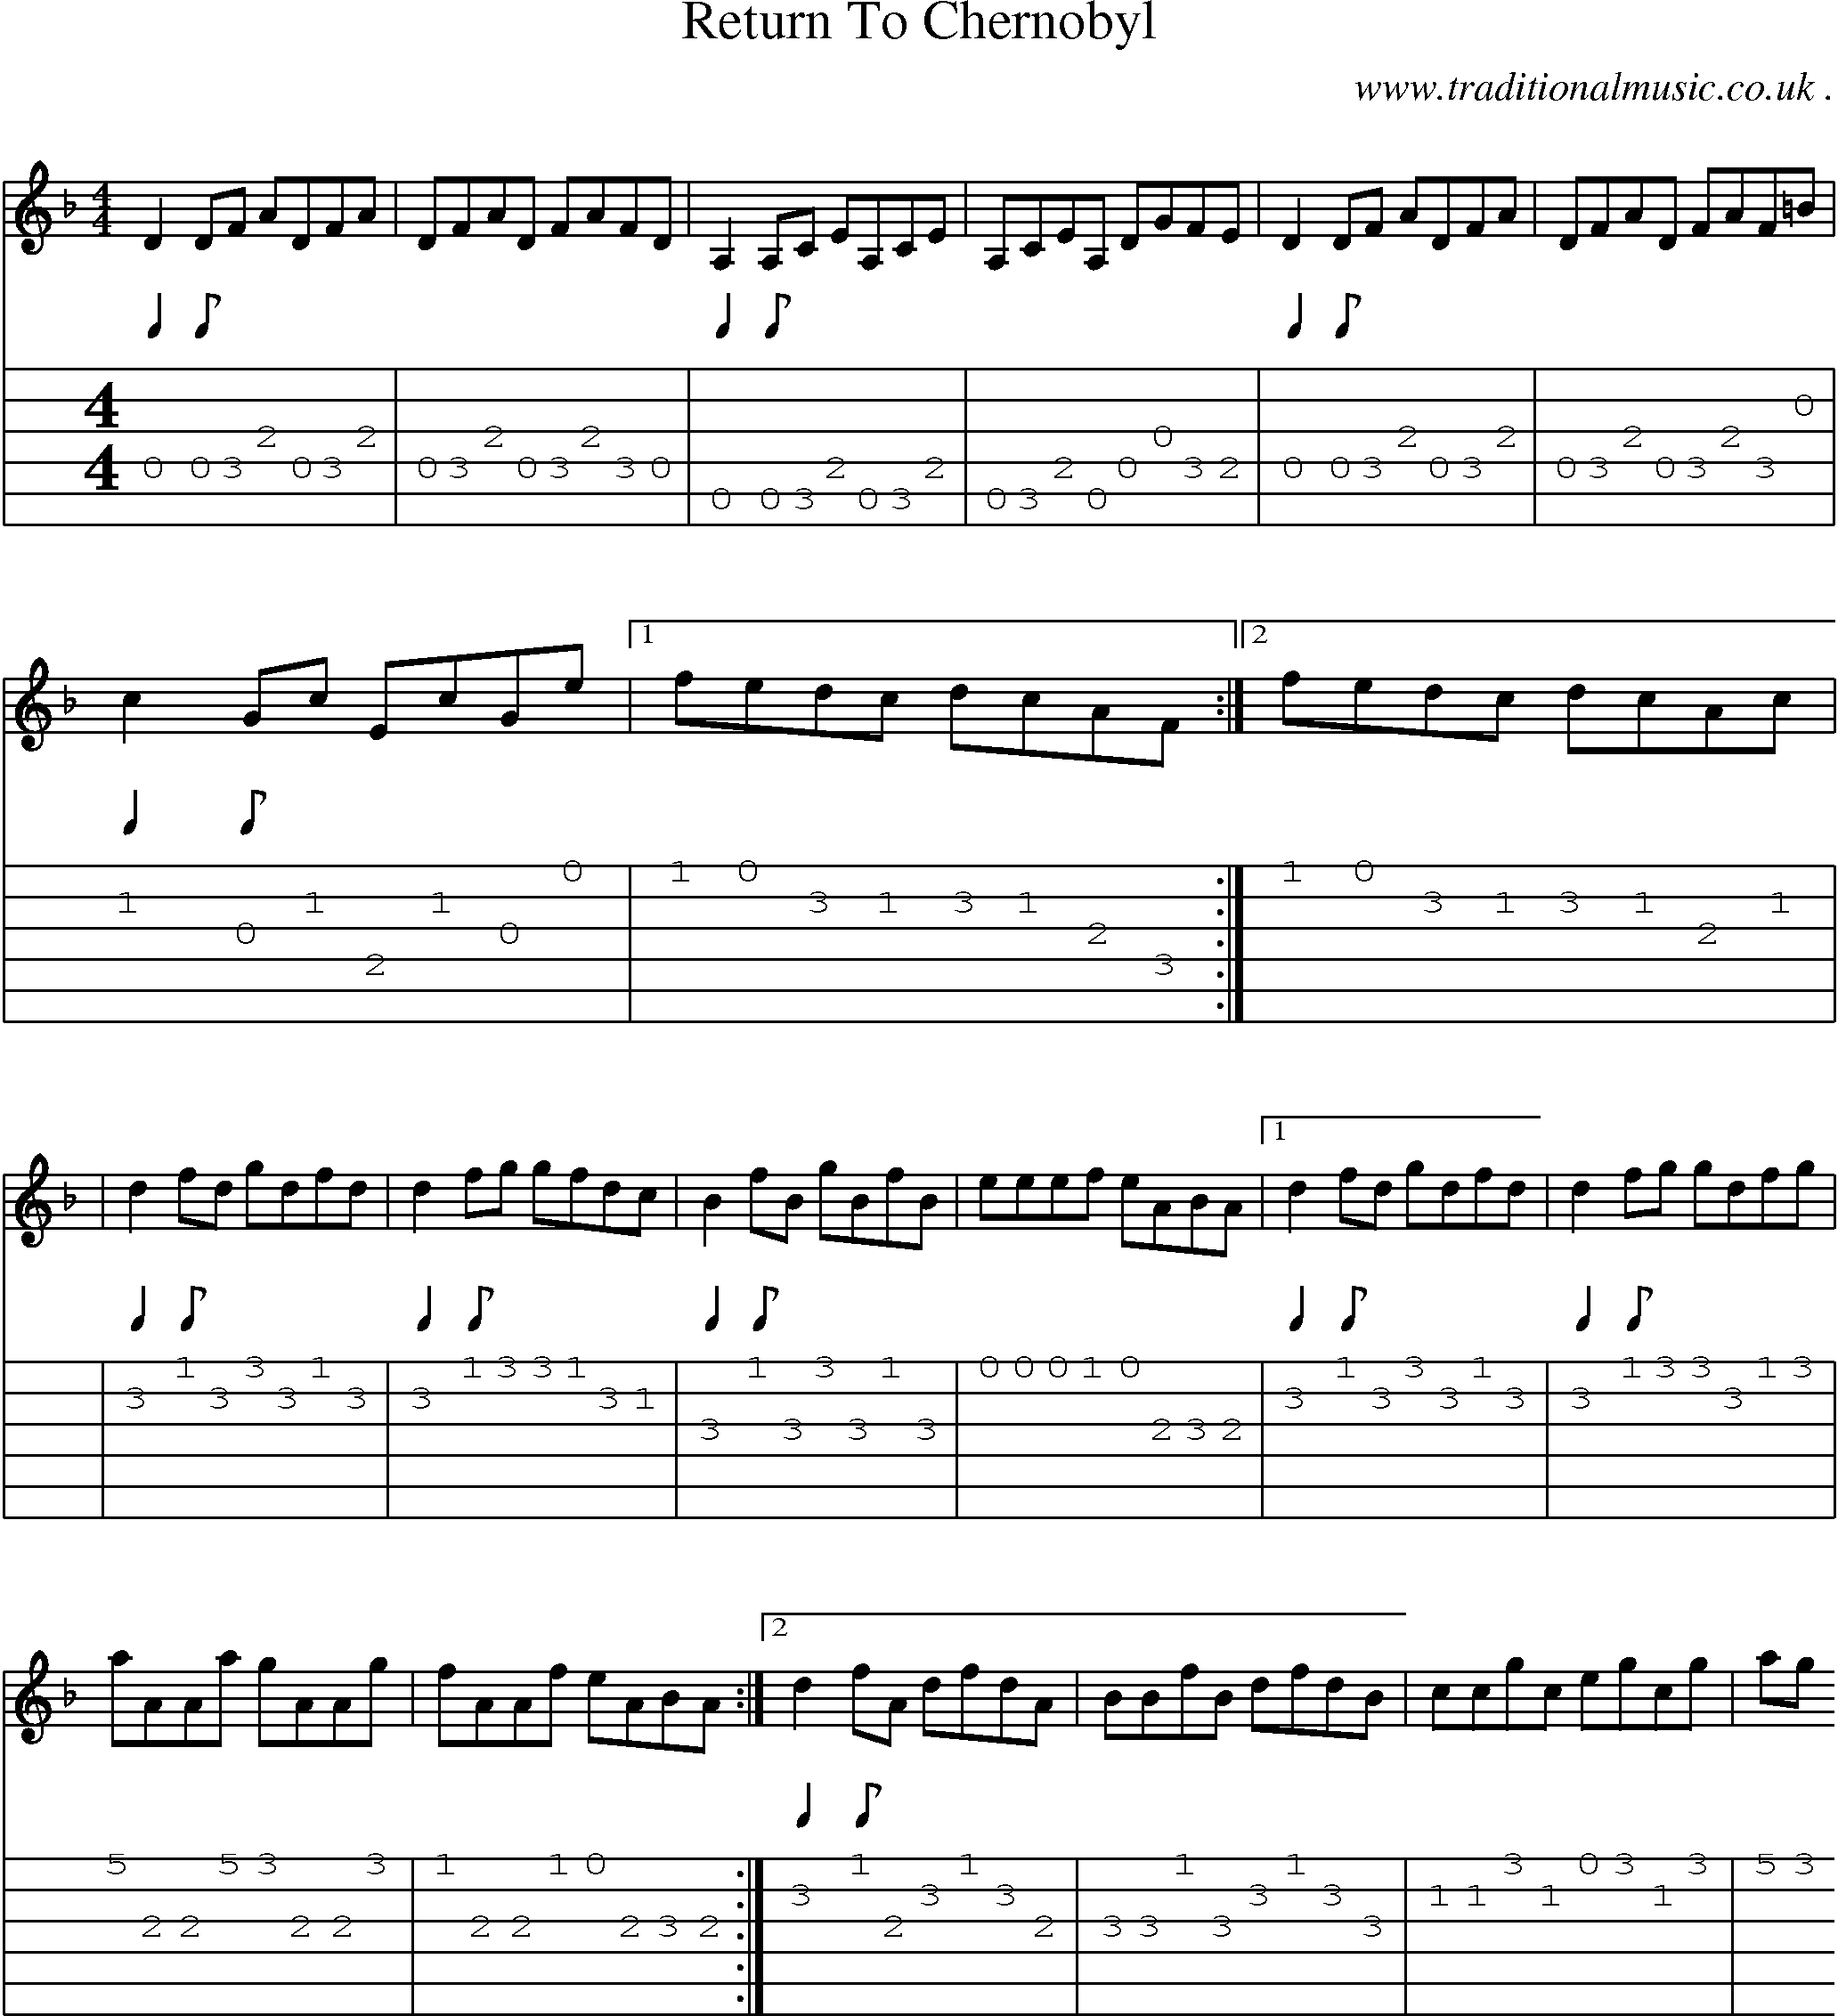 Sheet-Music and Guitar Tabs for Return To Chernobyl